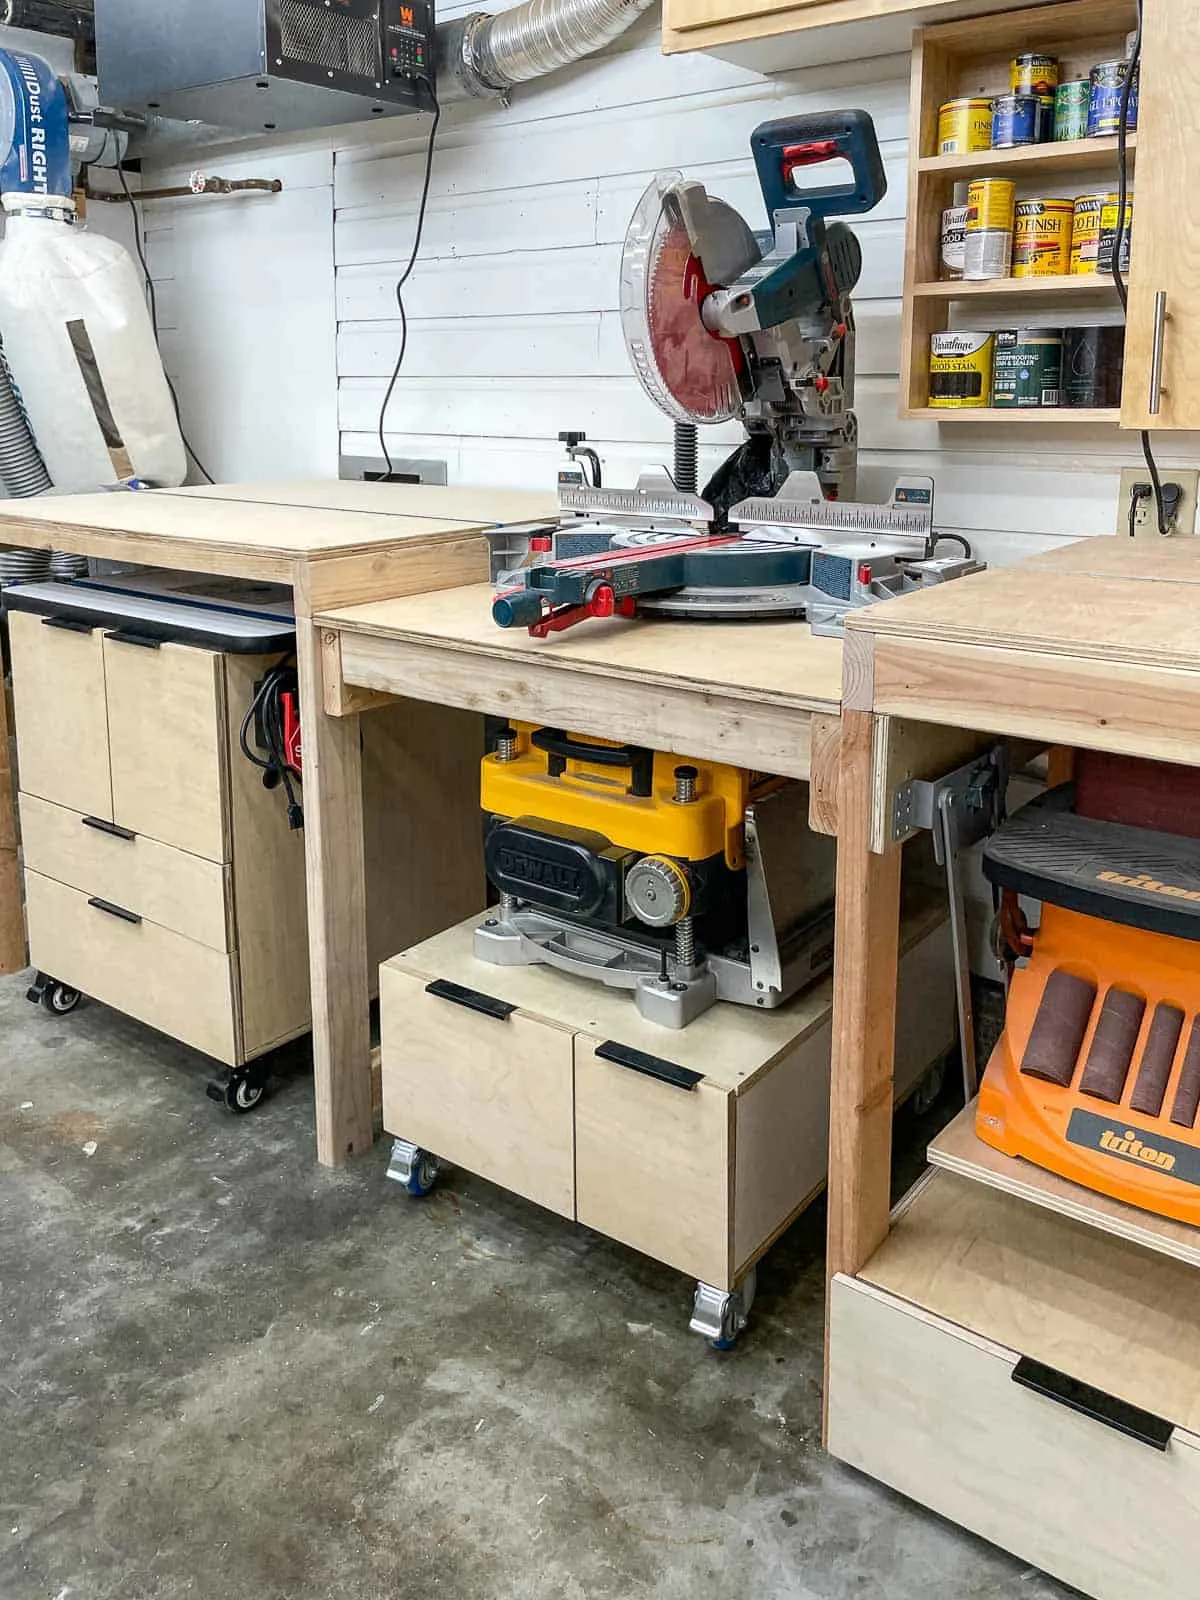 miter saw station with router table, planer stand, benchtop sander and lots of storage